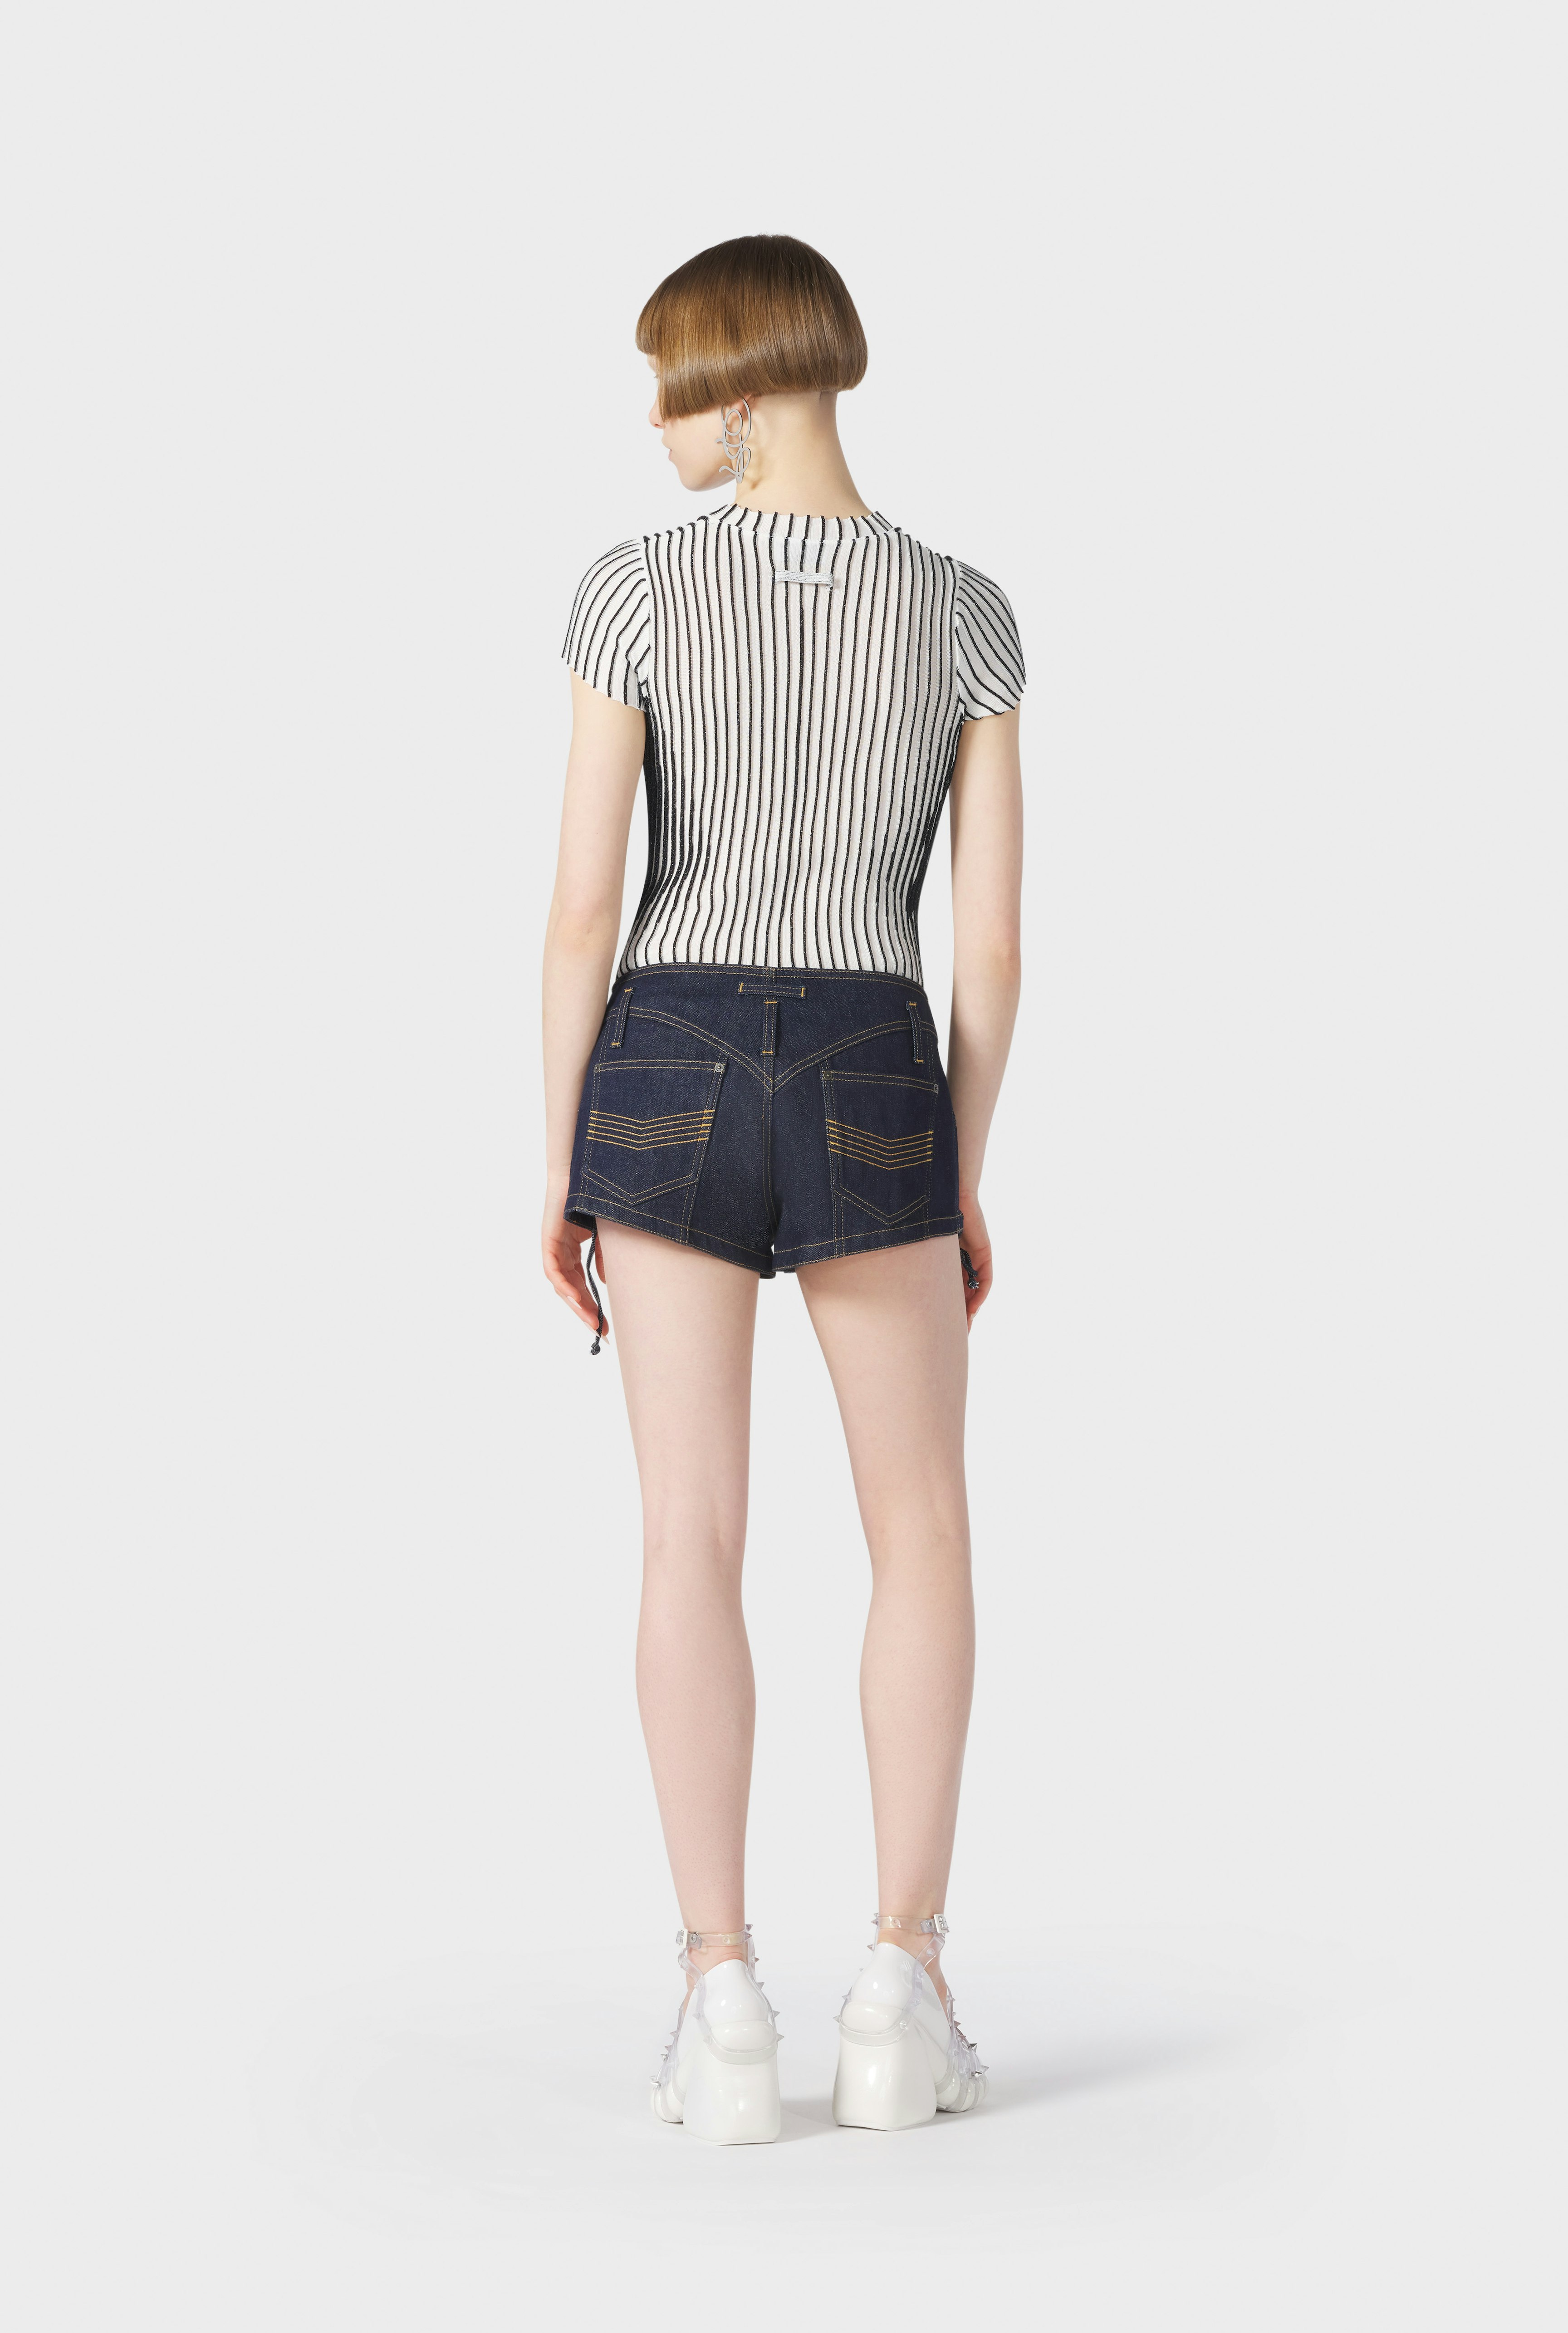 The Lace-Up Denim Shorts